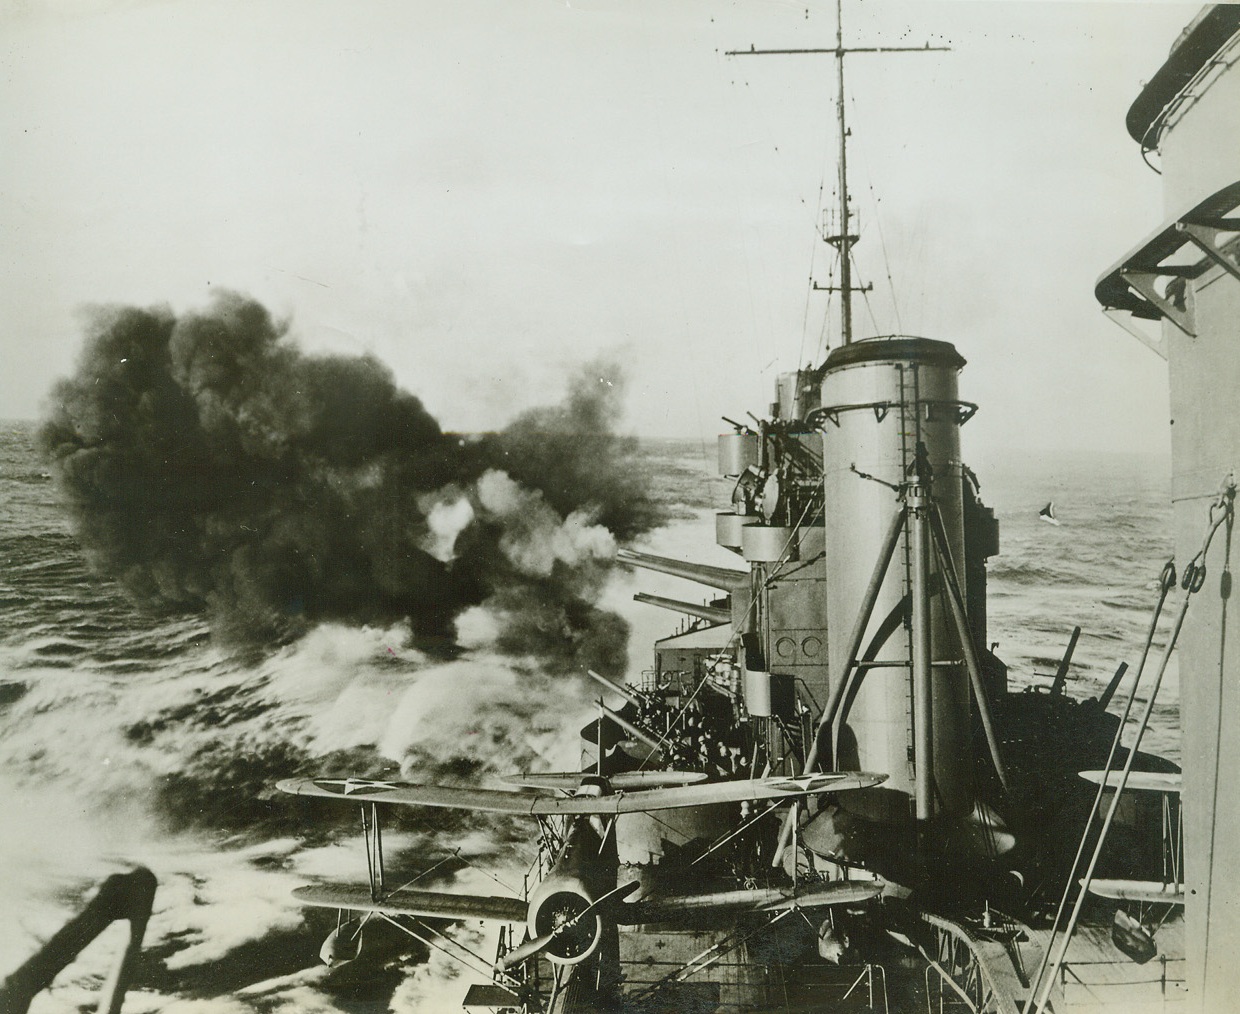 U.S. Cruiser Bombarding Wake Island, 3/25/1942. A United States Pacific fleet task force carried out a surprise attack on Japanese occupied Wake Island on Feb. 24th, smashing shore installations sinking two patrol boats and demolishing 3 large seaplanes.  The U.S. Navy announced in Washington on March 25th.  The above photo released simultaneously by the Navy shows a U.S. cruiser as her main battery bombarded the Jap forces on Wake island as anti-aircraft crews stand by. Credit line (U.S. Navy official photo from ACME);